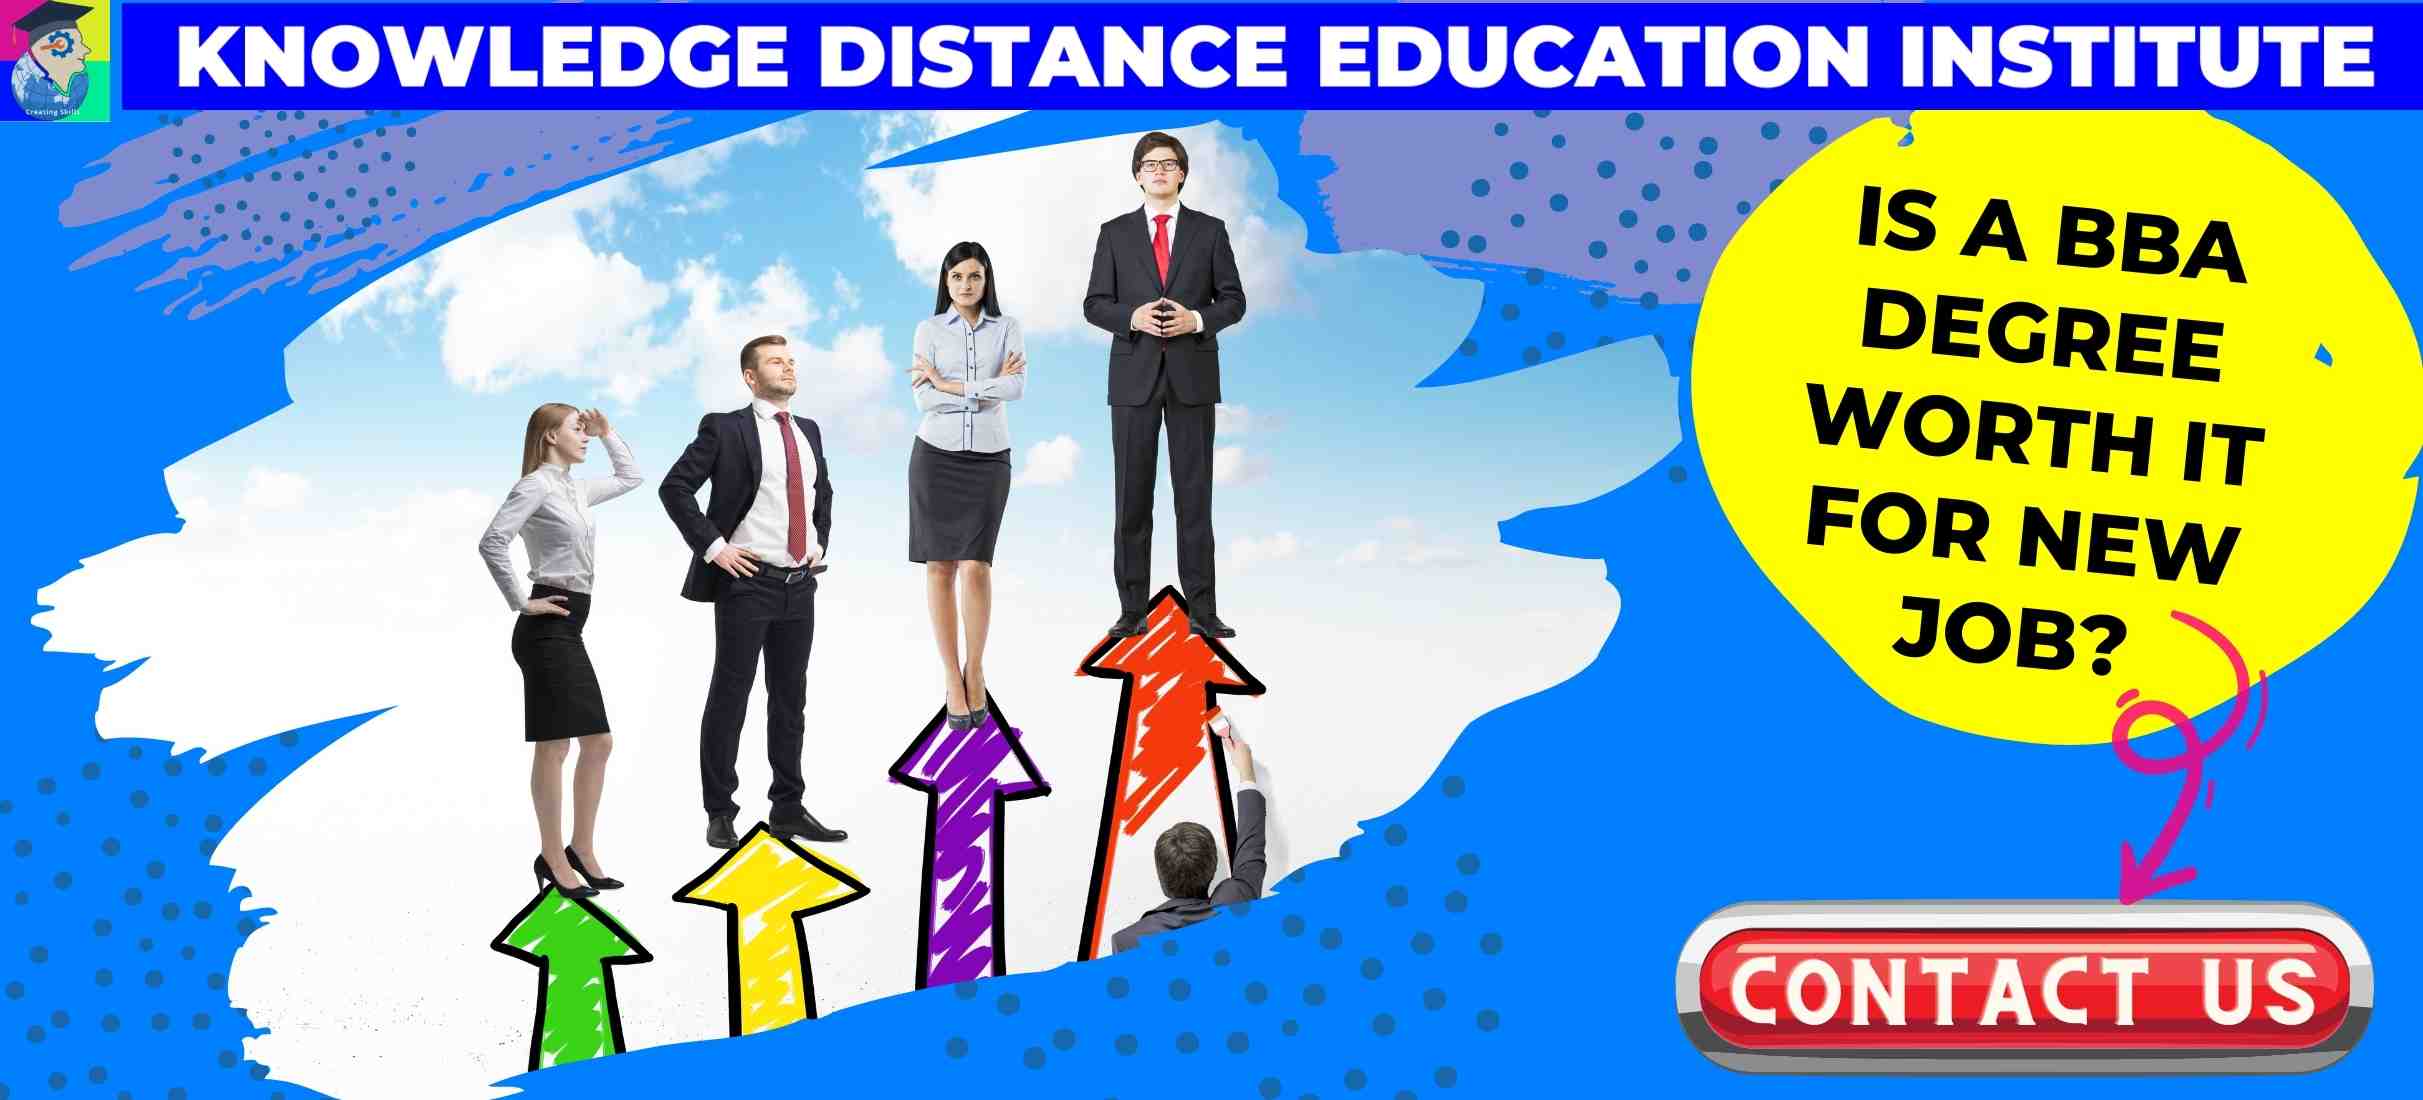 Bachelor Of Business Administration - BBA is 3 years degree course, offered in Distance, Online, Private, or Regular Learning modes by UGC recognized Universities in India. For career guidance you may contact Knowedge Distance Education Institute on +91 9029020524